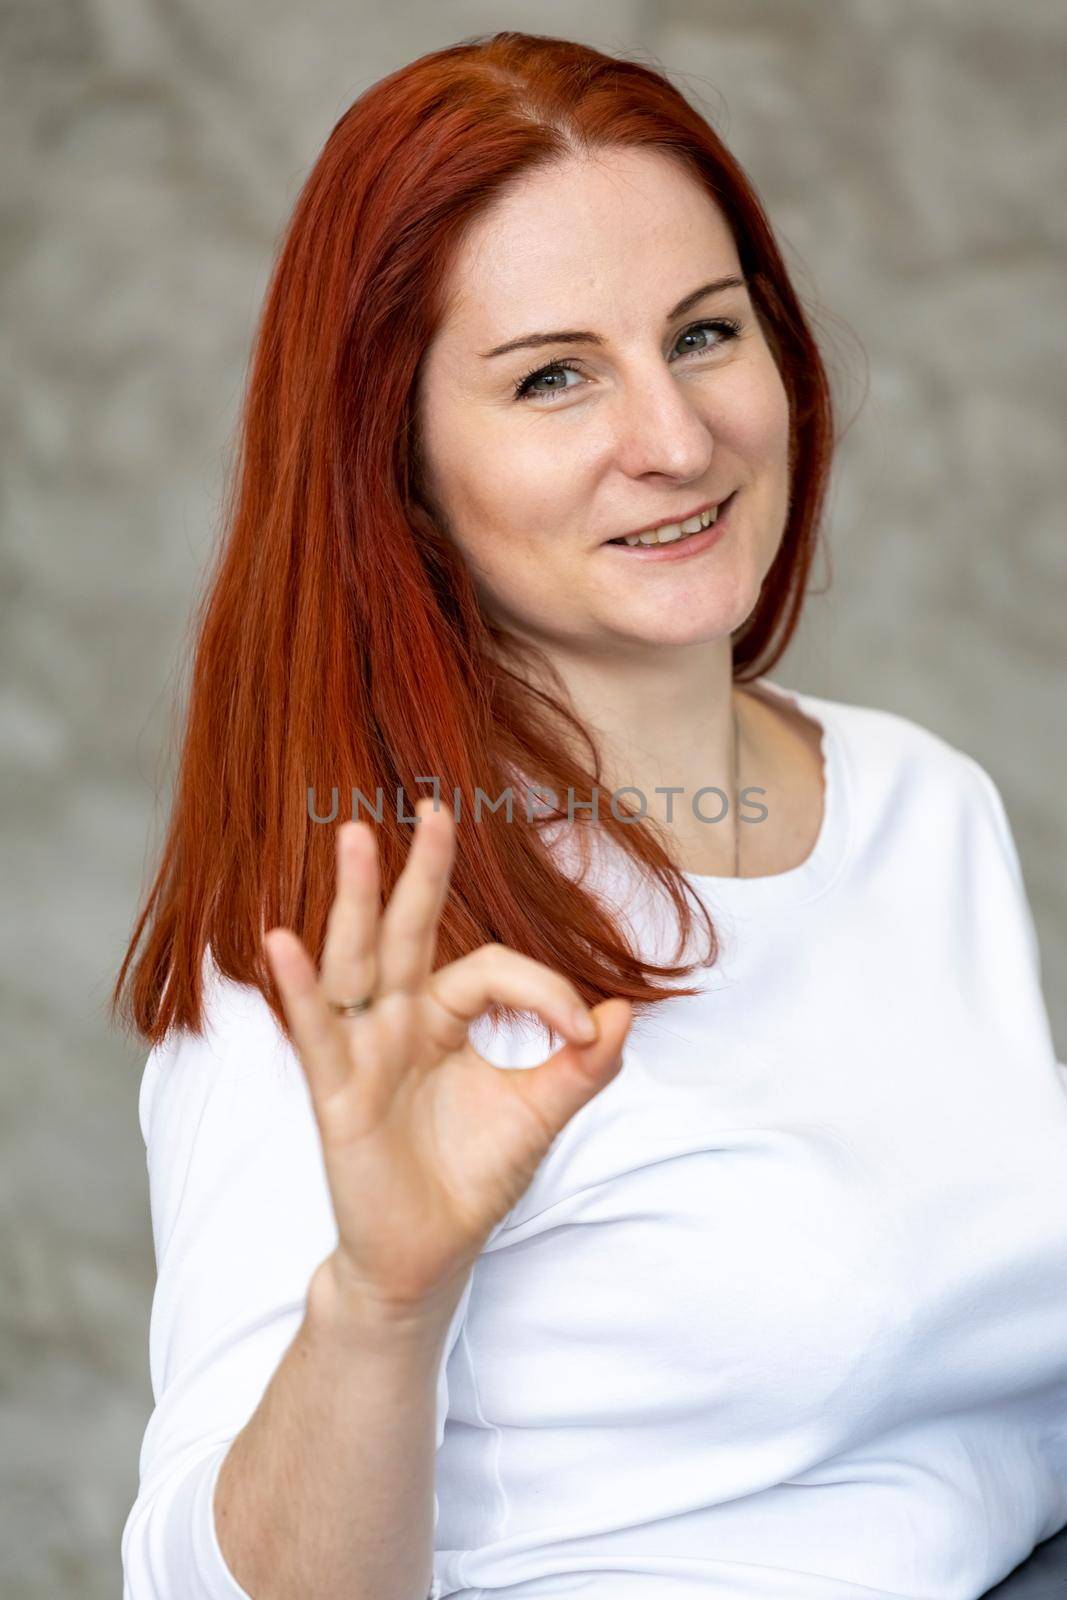 smiling woman with red hair showing her fingers approx. vertical photo portrait, close up